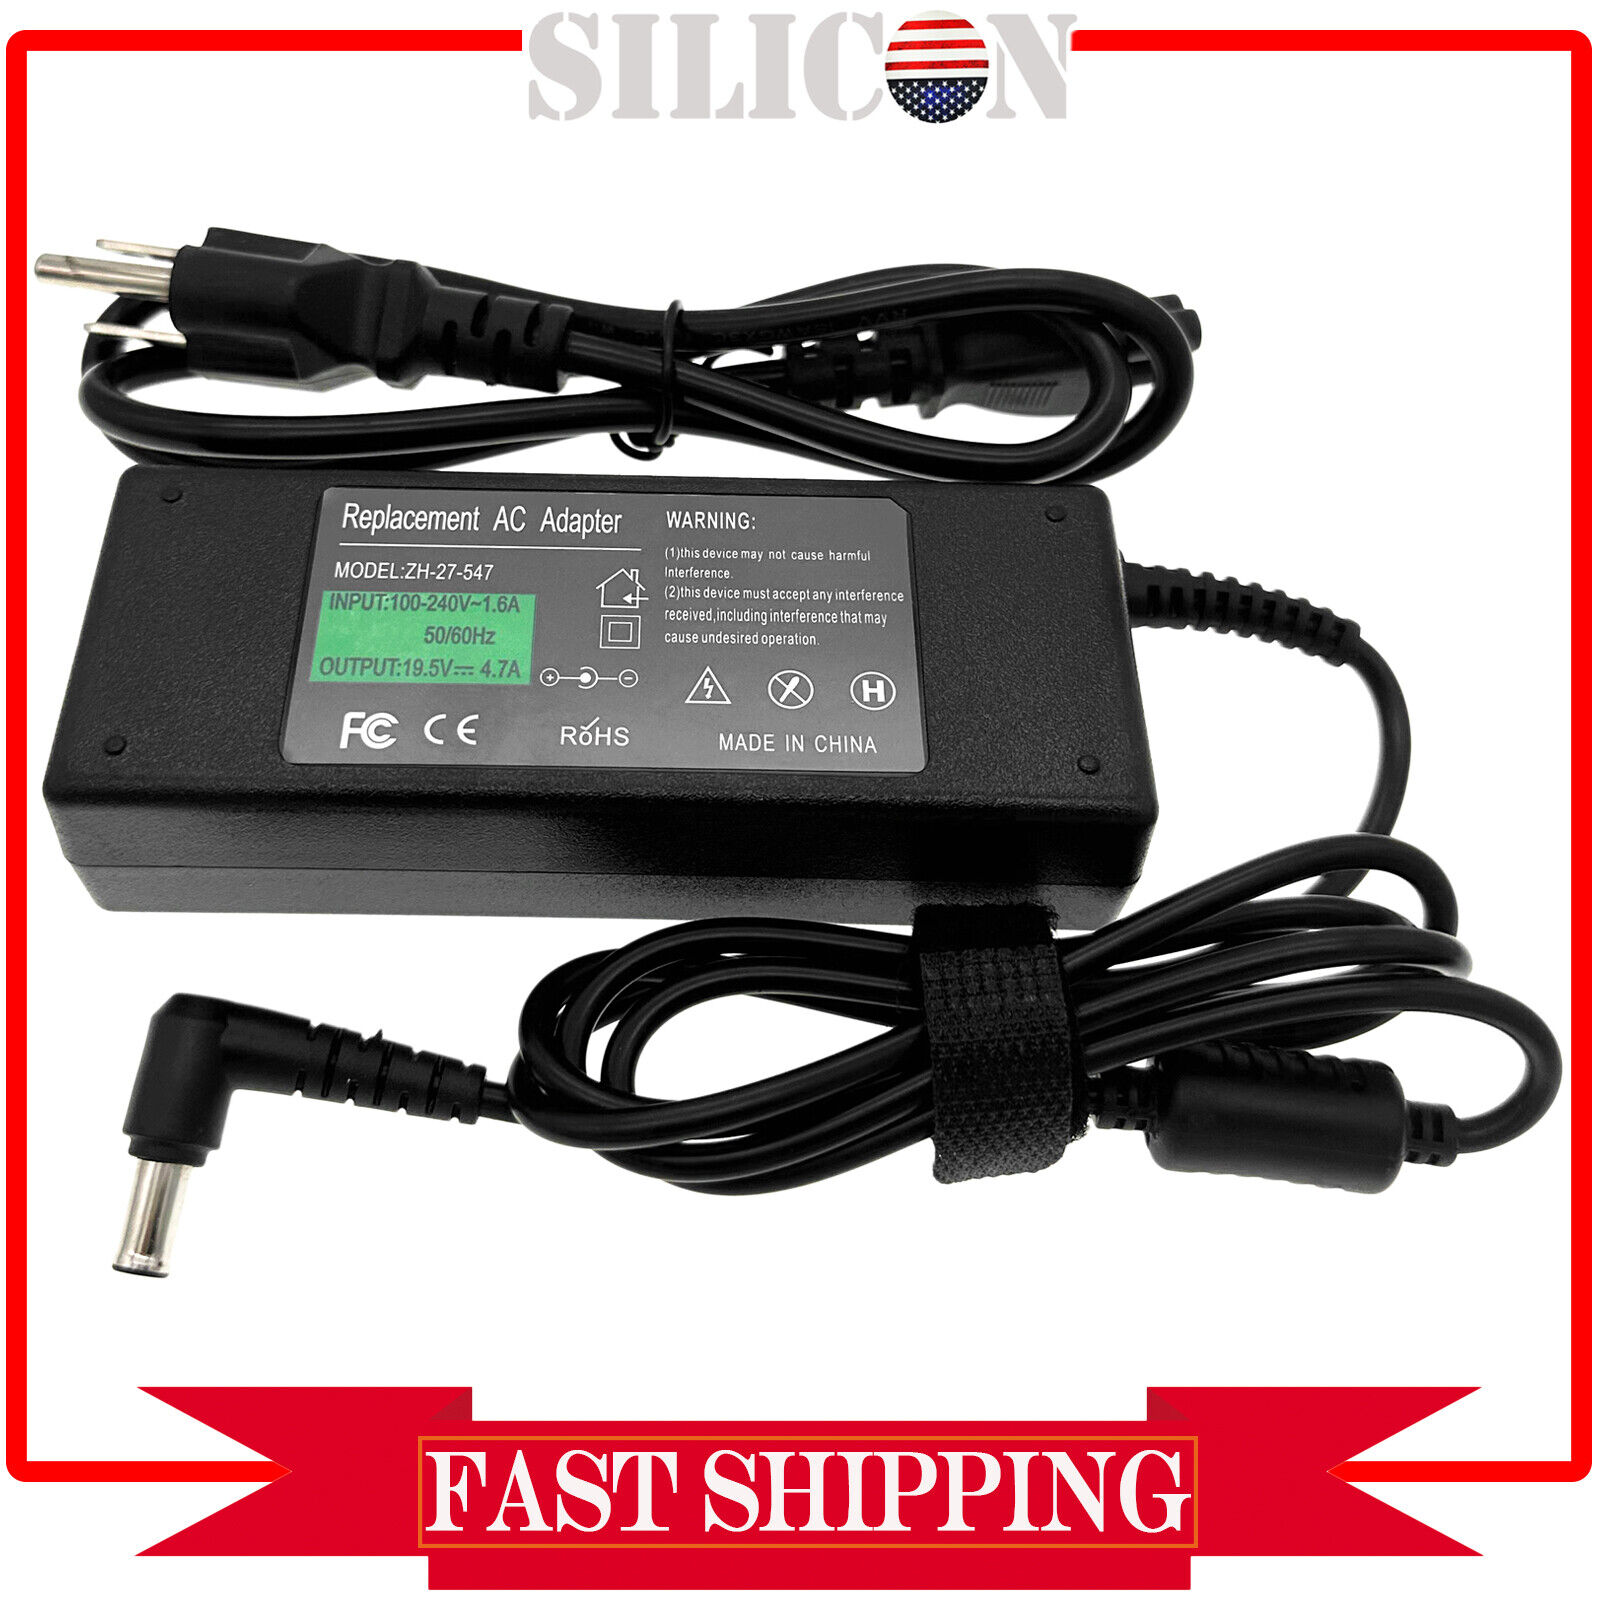 AC Adapter For Samsung UN32M4500AF UN32M4500AFXZA HD LED TV Power Supply Cord